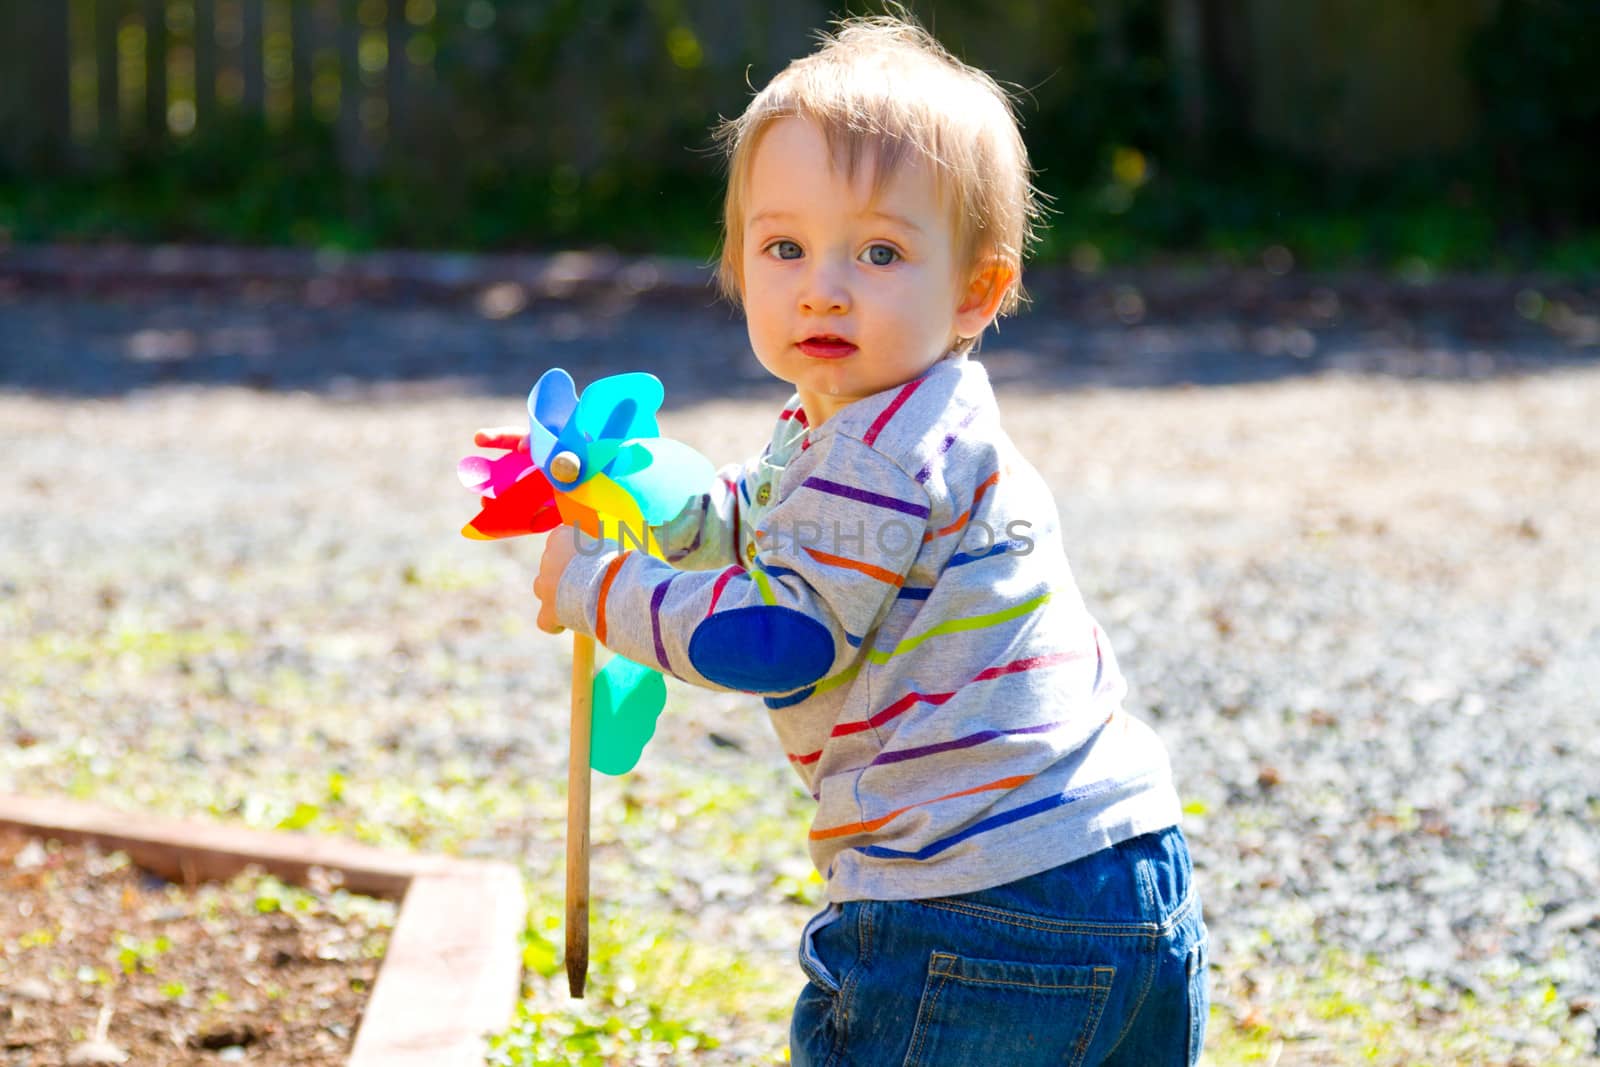 A one year old boy plays with a whirligig propeller pinwheel outside while wearing a striped shirt.